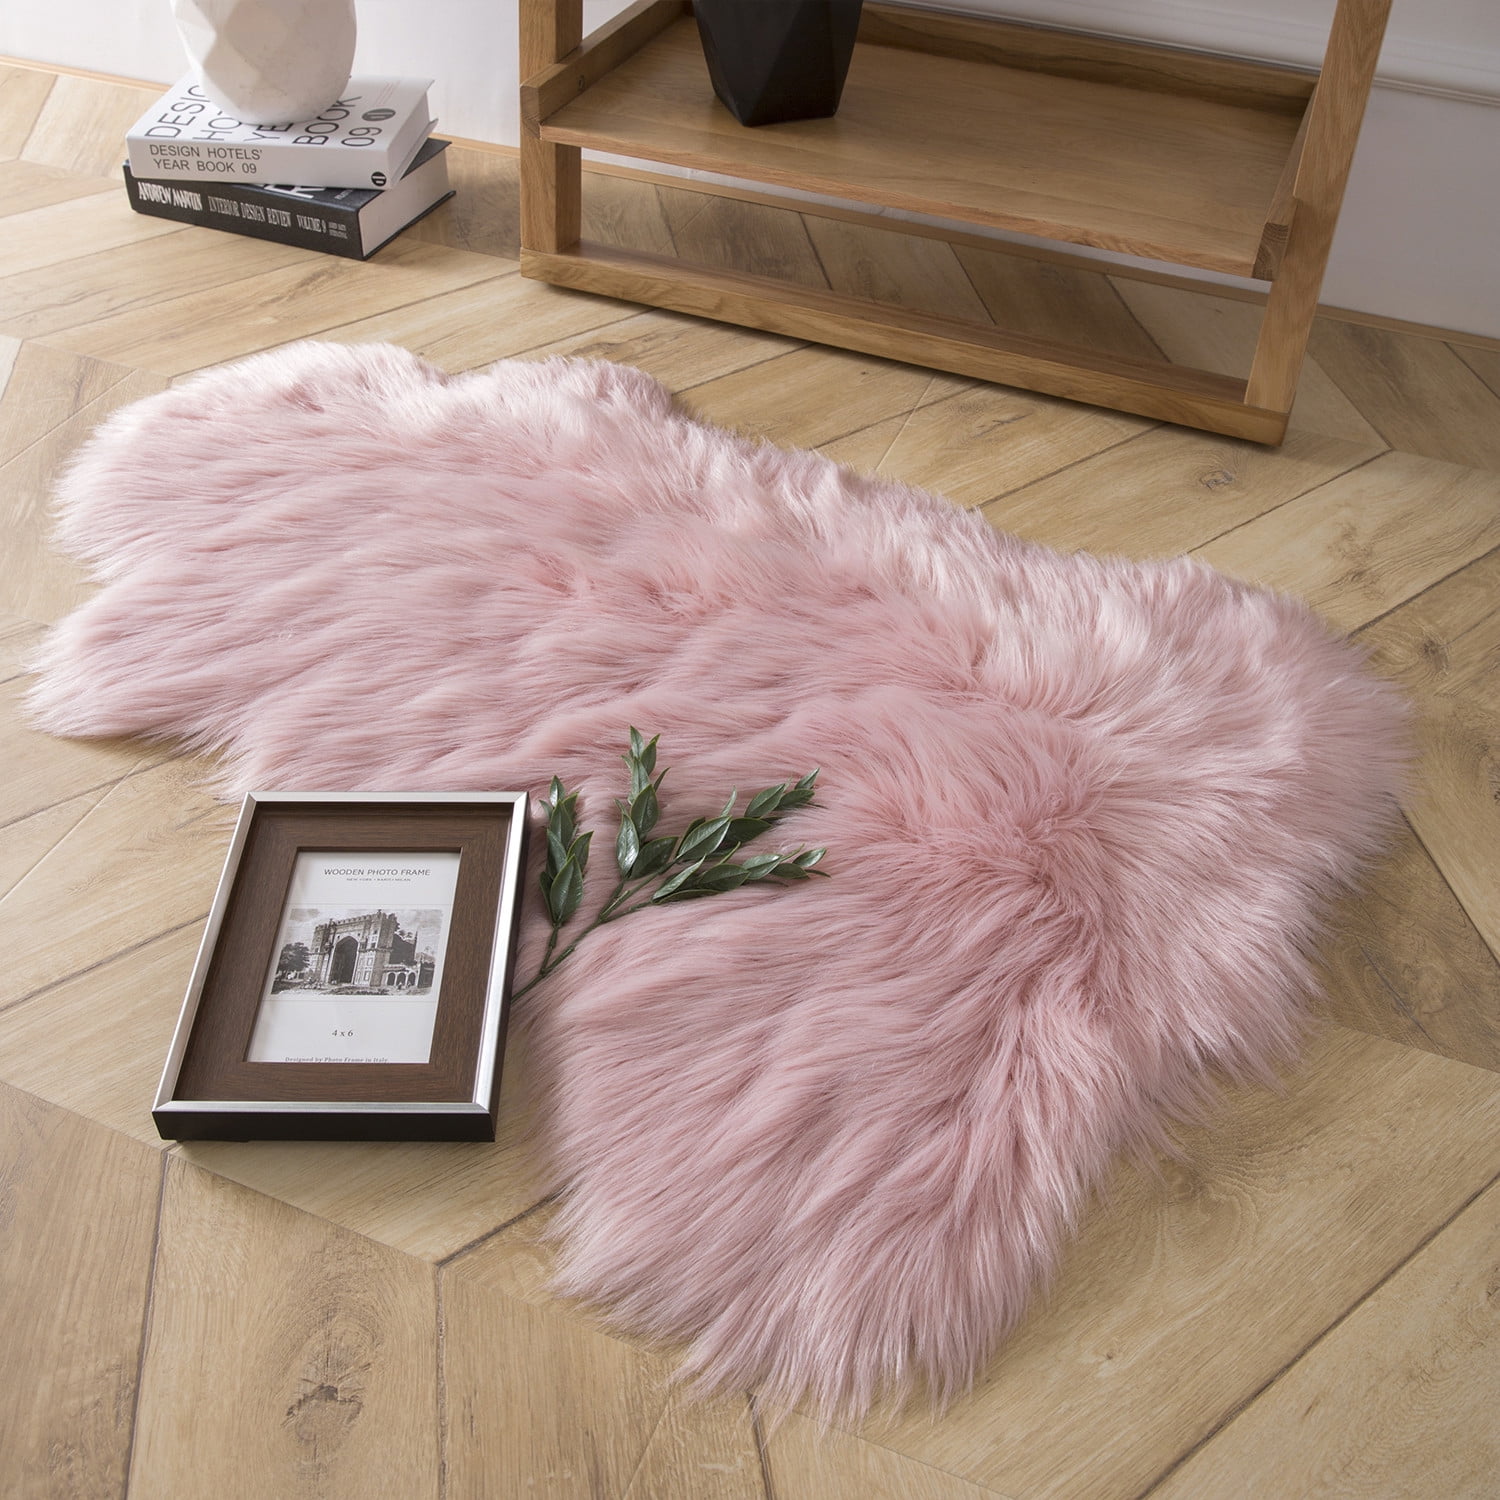 Hot Pink Mongolian Faux Fur Throws Area Rugs Accents Home Decors Nursery Rug 